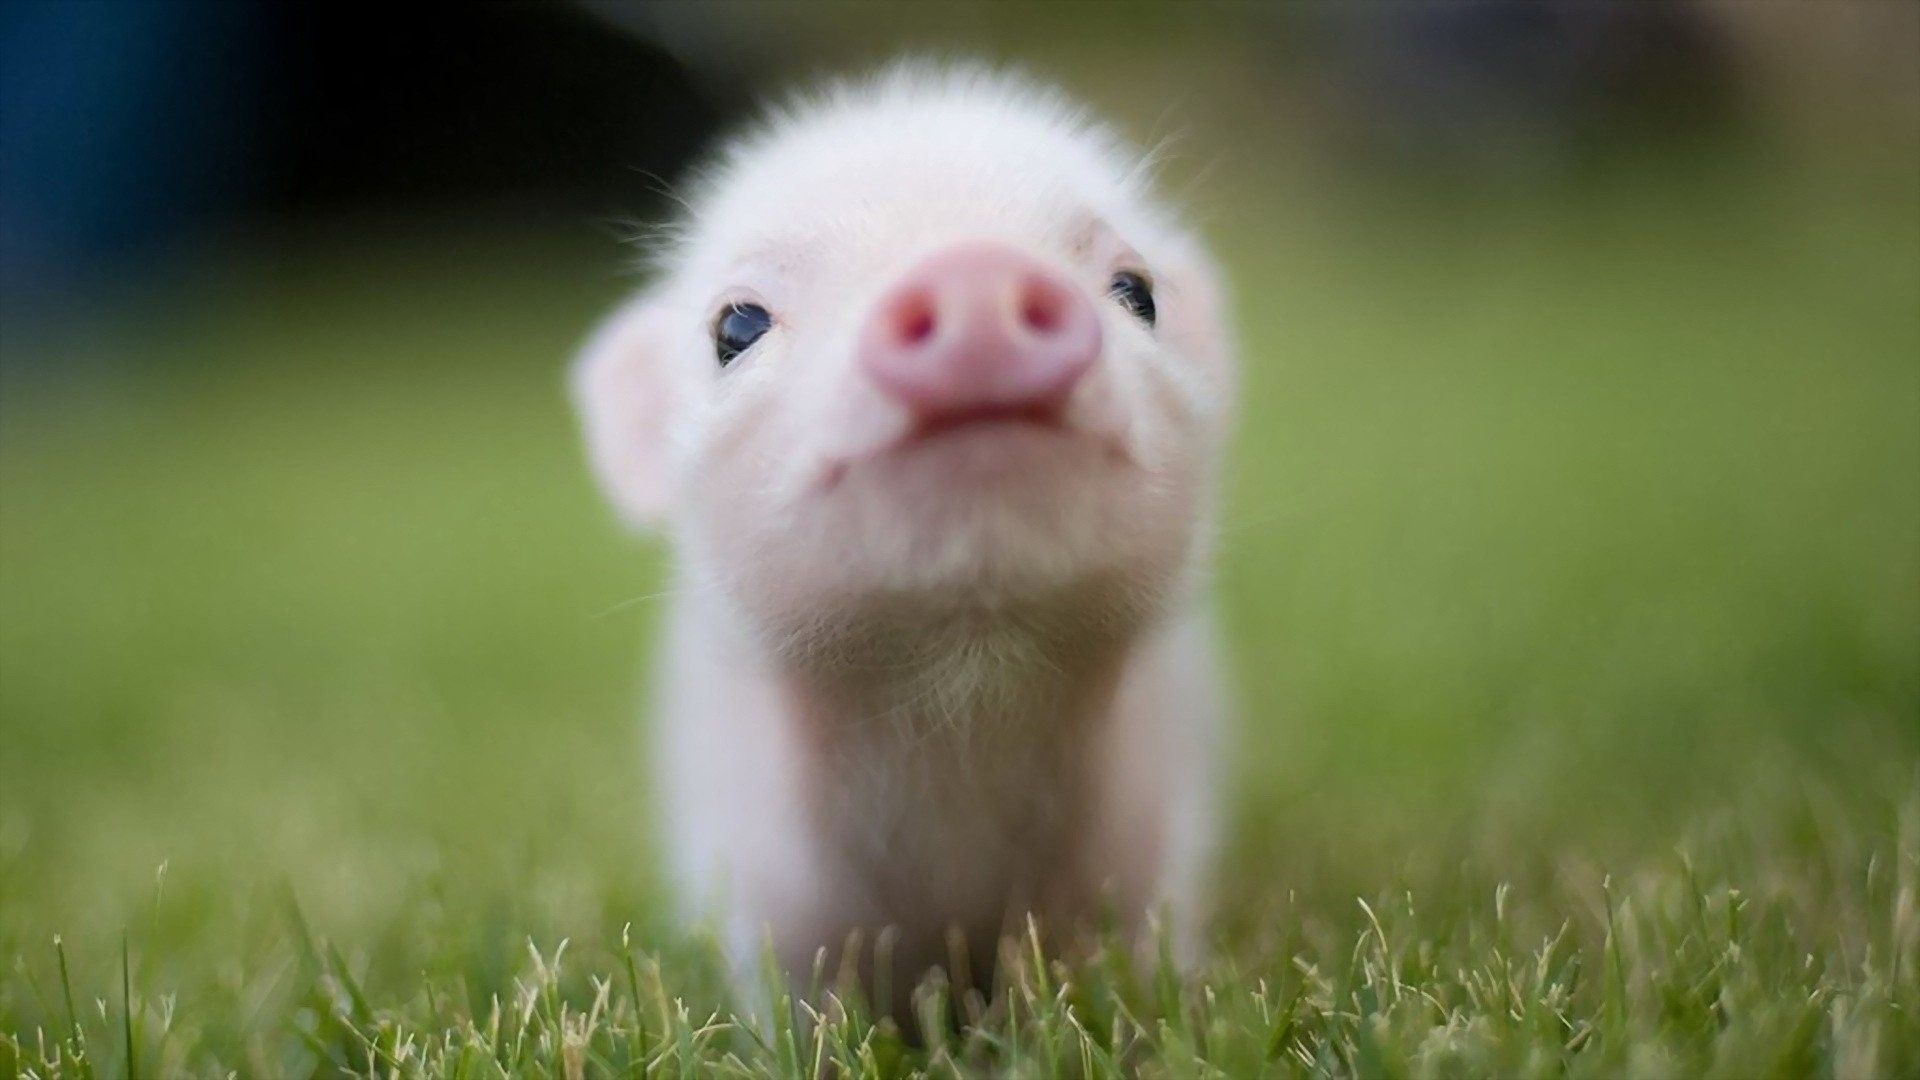 Baby Pig Wallpaper Free Baby Pig Background